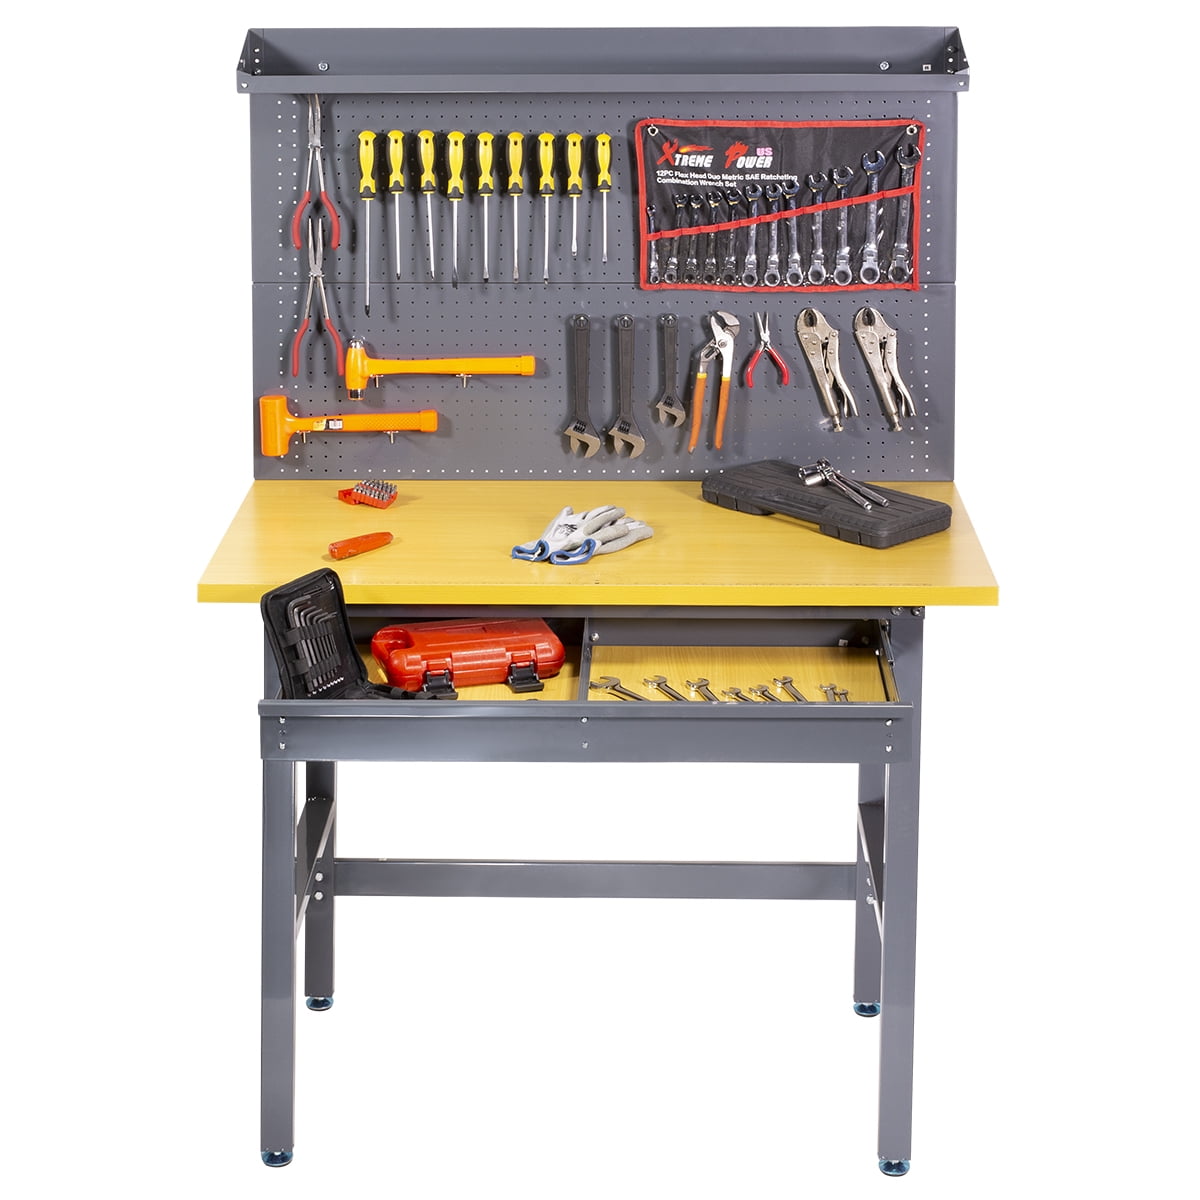 Blue Steel Garage Work Bench Tool Box Workbench Storage With Drawers Pegboard and 12 Pegs Shelf Boltless DIY Workshop Station Heavy Duty 440kg Capacity